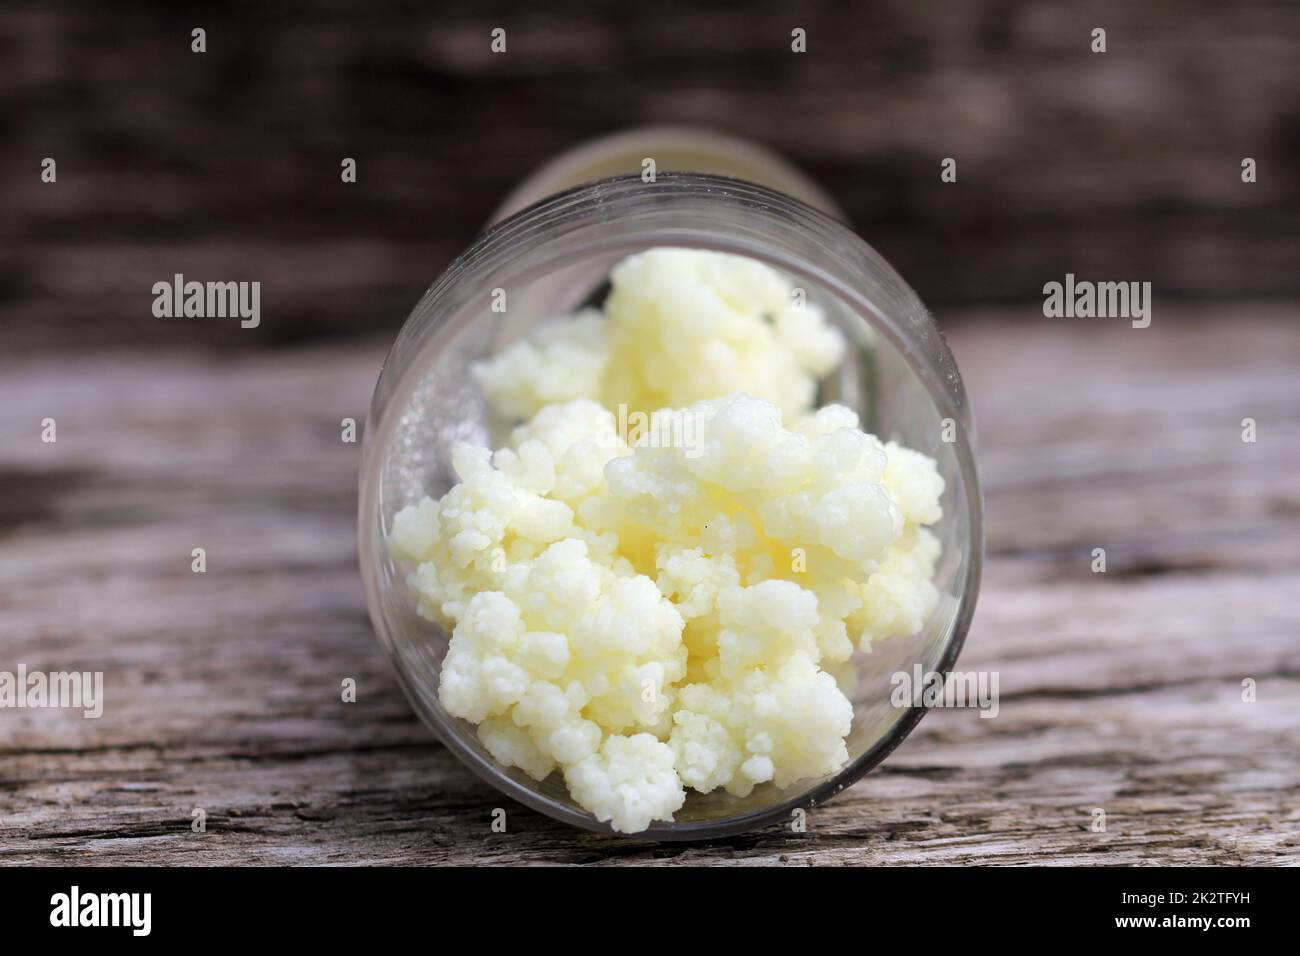 kefir mushroom into glass on wooden Background for healthy milk drink Stock Photo